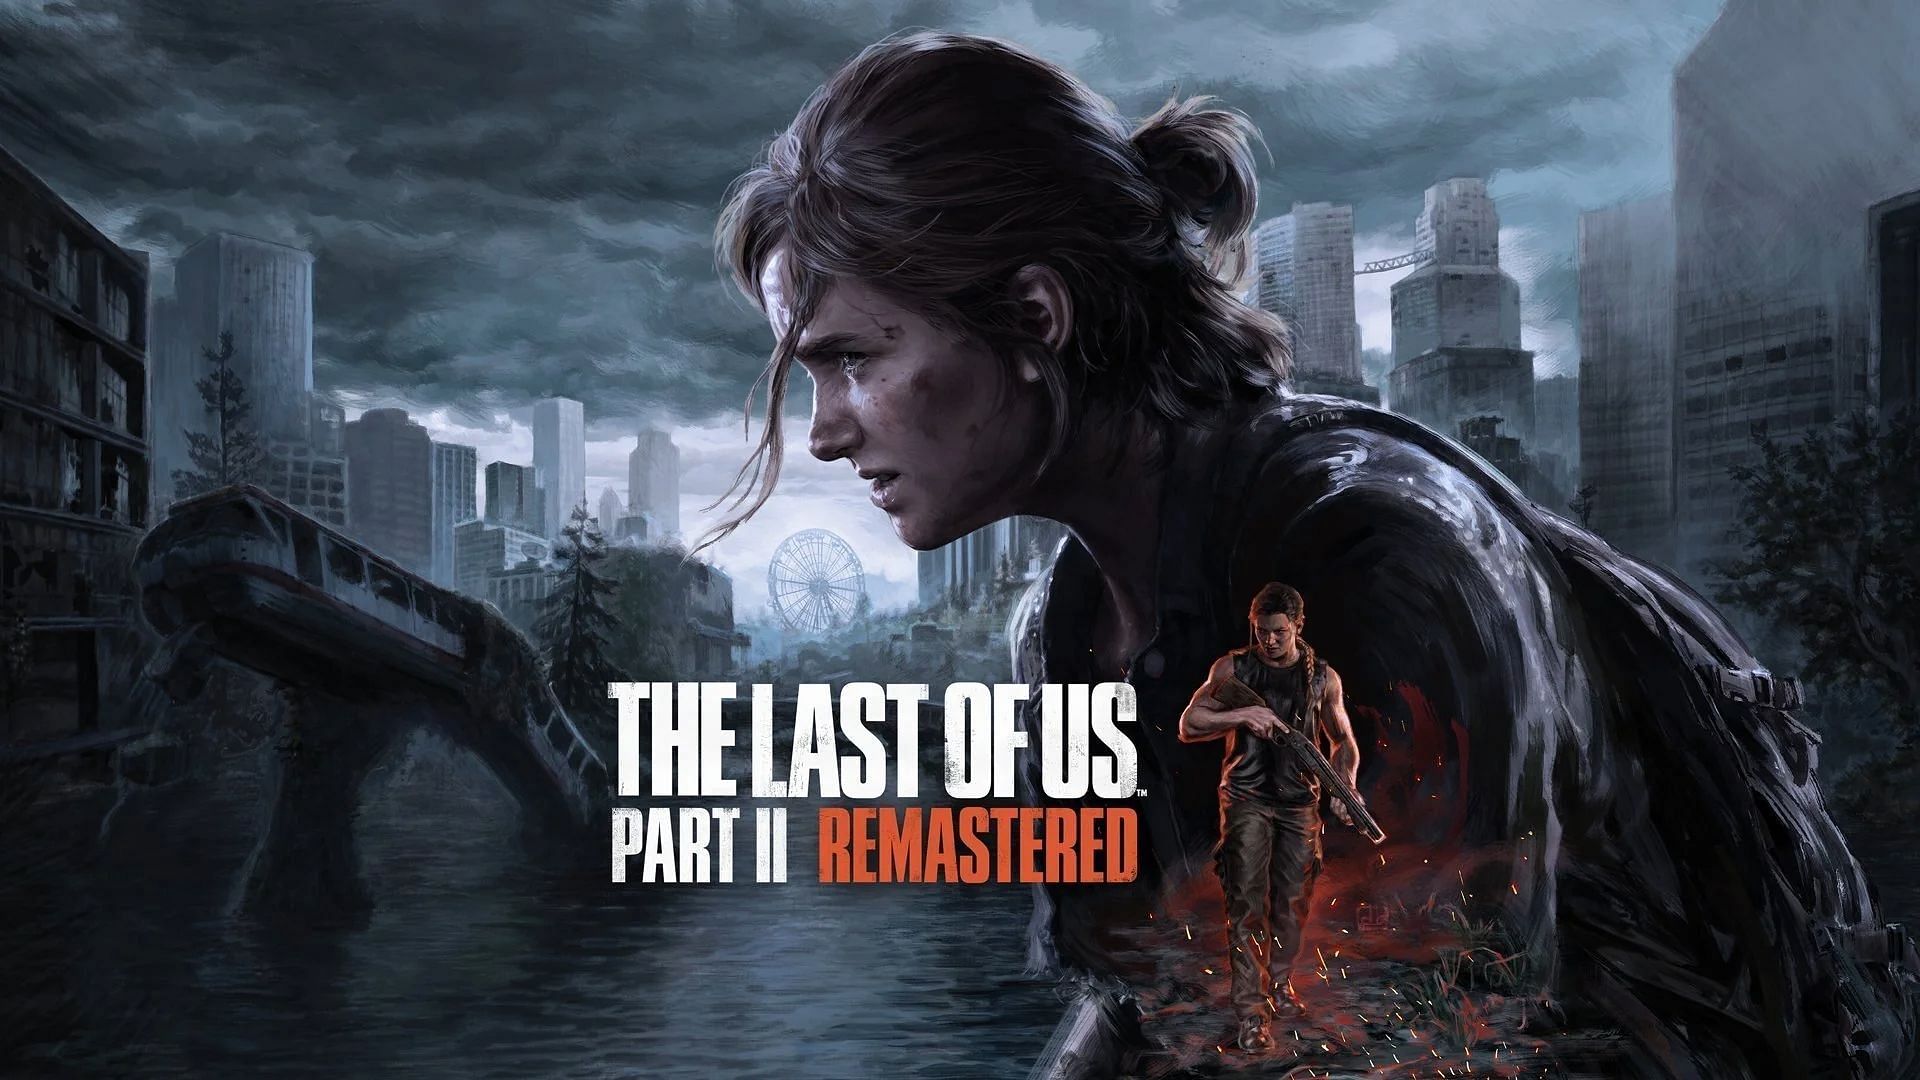 The Last of Us Part 2 Remastered was recently announced by PlayStation (Image via Naughty Dog)